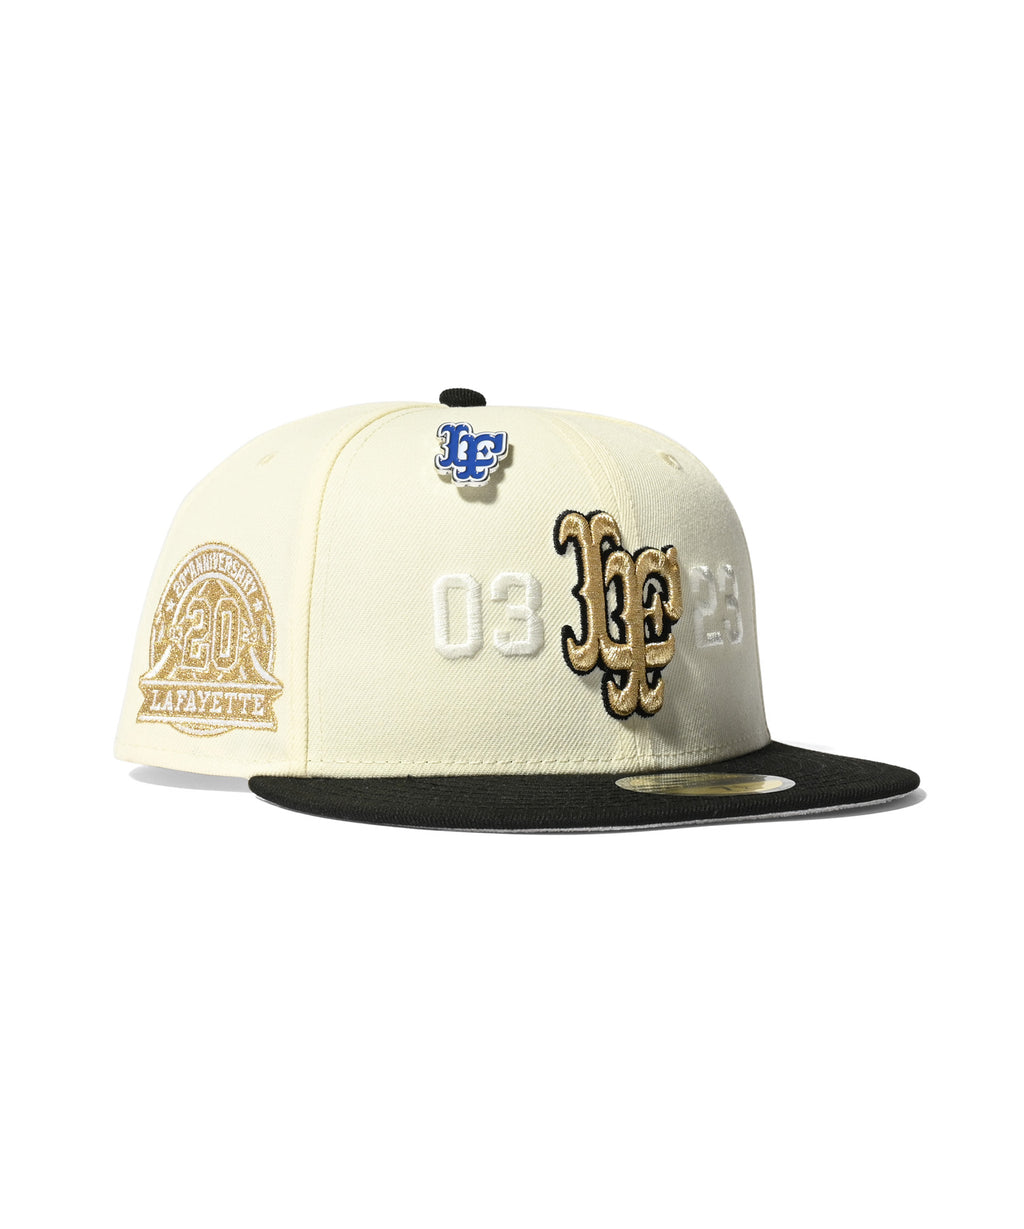 Online shopping for LFYT × NEW ERA collaboration items